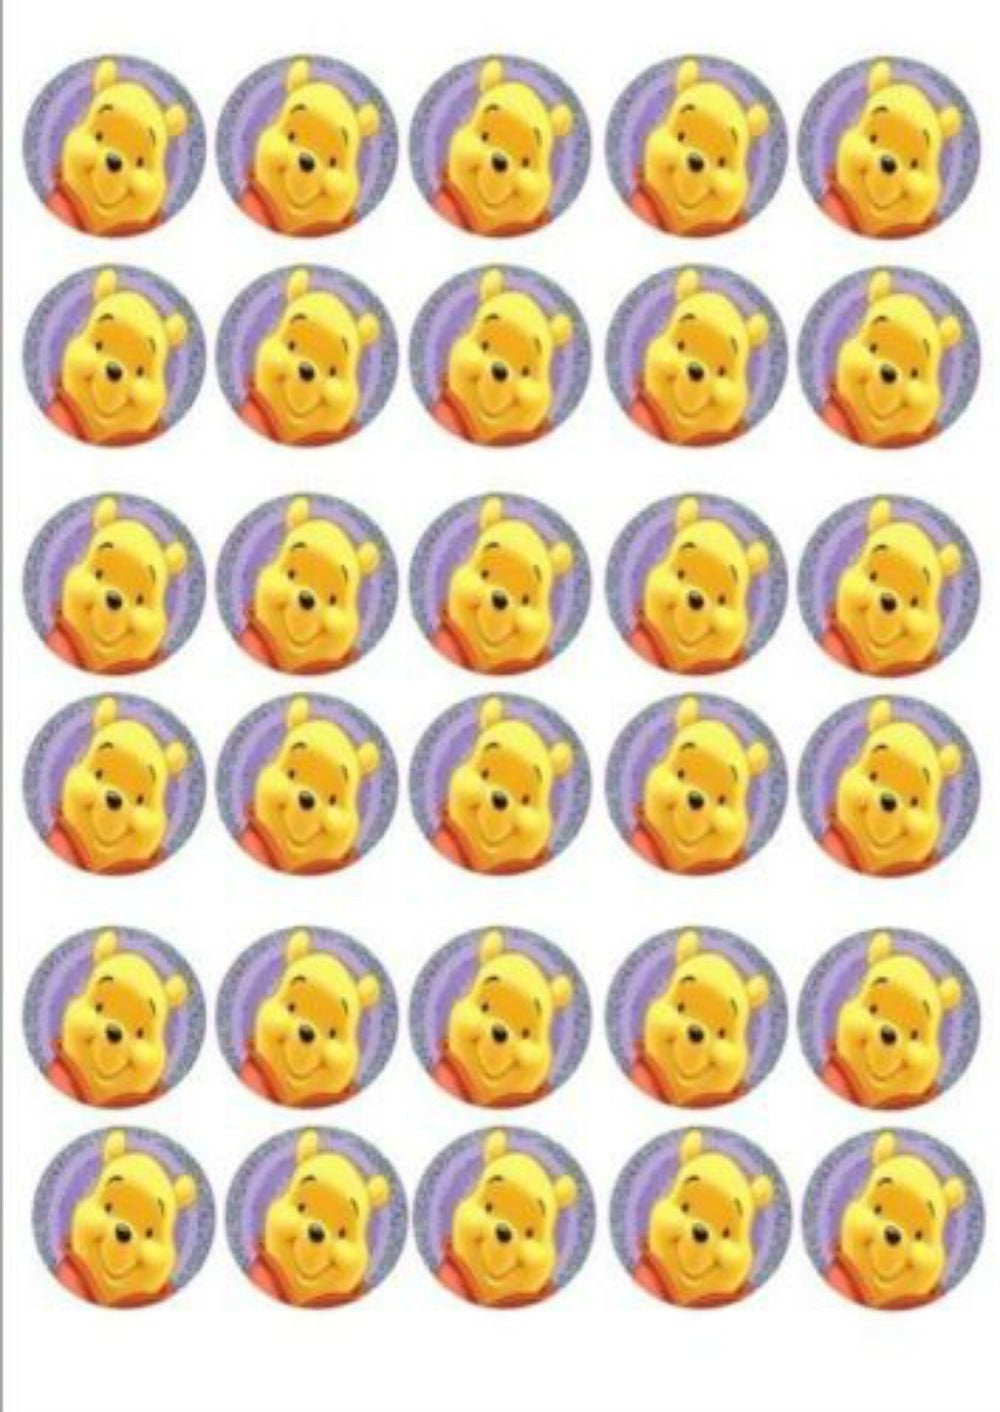 Winnie the Pooh: Free Printable Cake Toppers.